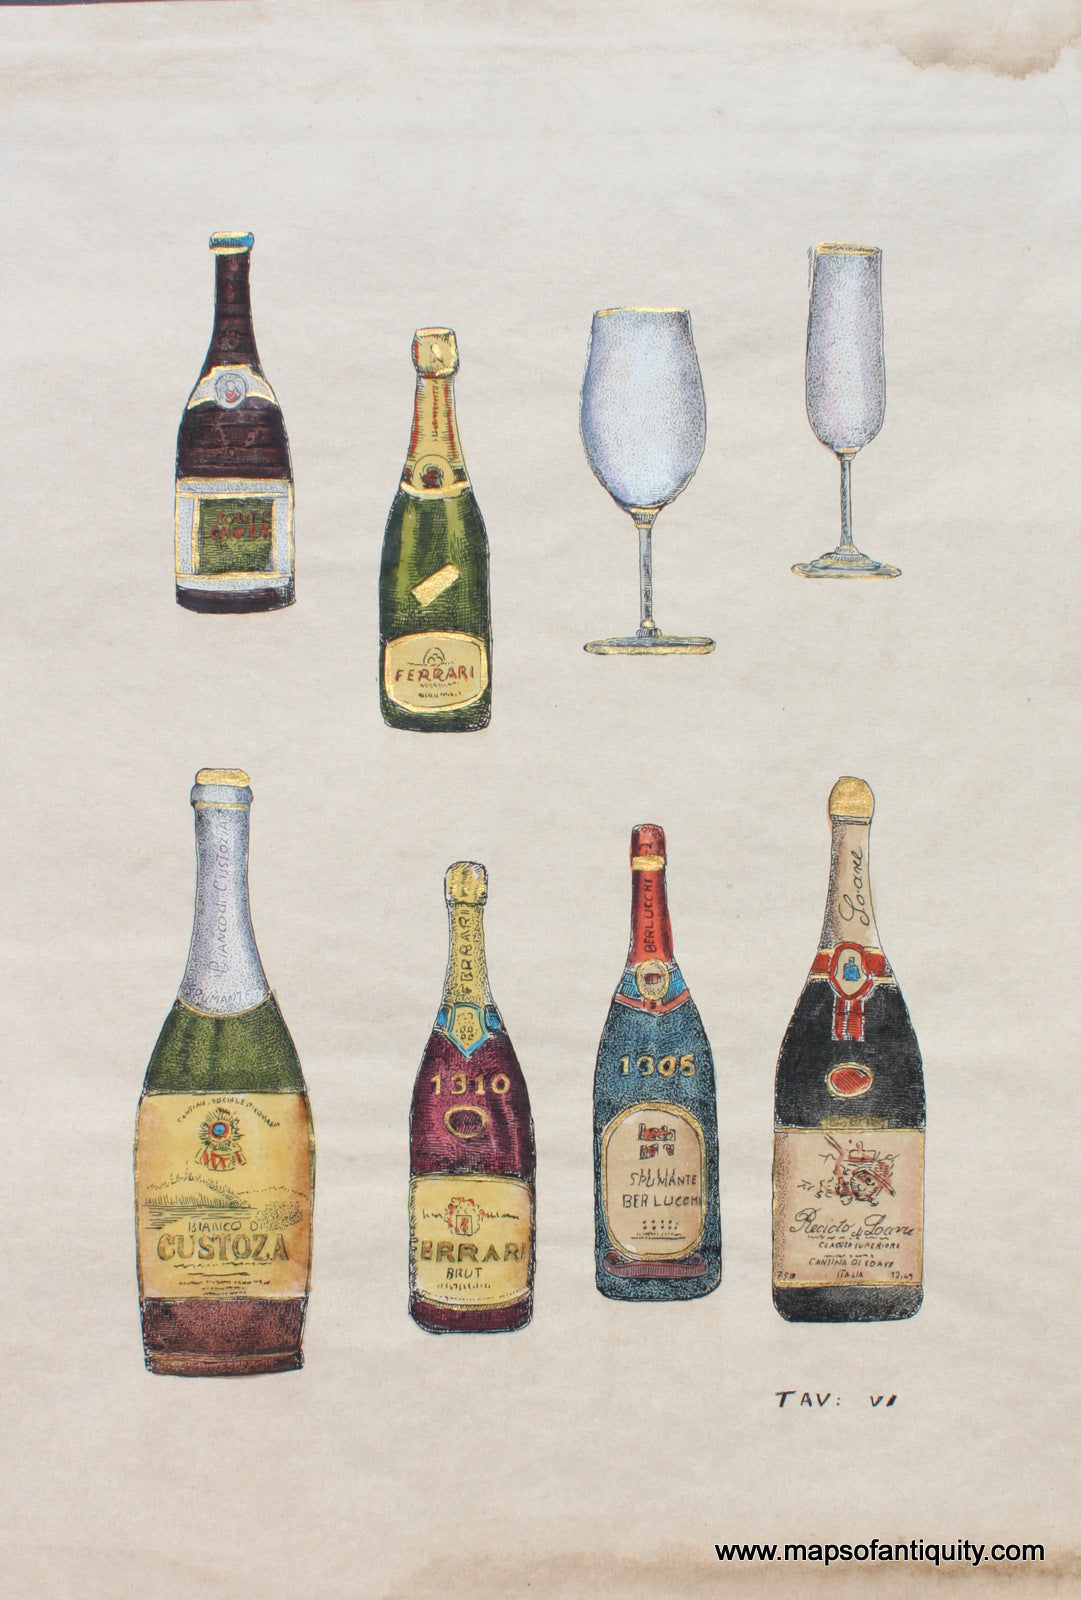 Reproduction-Antique-Print-Prints-Wine-Red-White-Glass-Glasses-Champagne-Types-Brut-Spumante-Maps-Antiquity